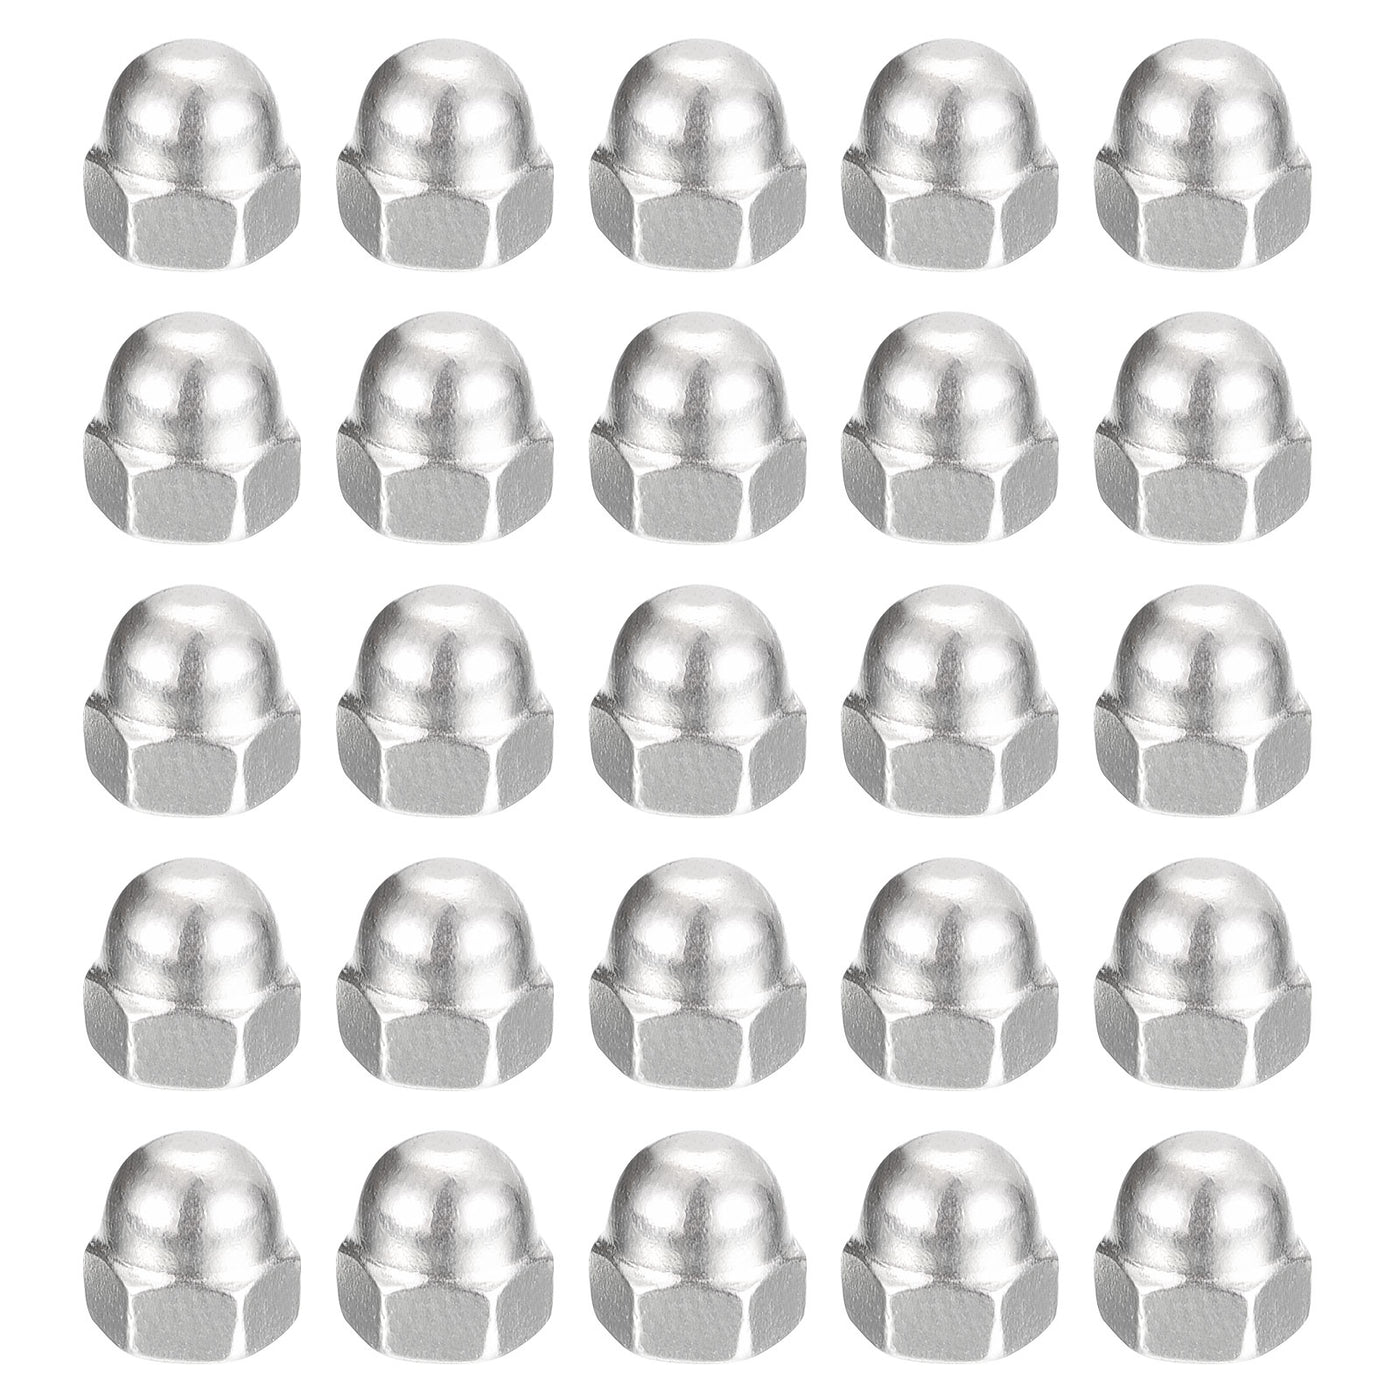 uxcell Uxcell #8-32 Acorn Cap Nuts,100pcs - 304 Stainless Steel Hardware Nuts, Acorn Hex Cap Dome Head Nuts for Fasteners (Silver)